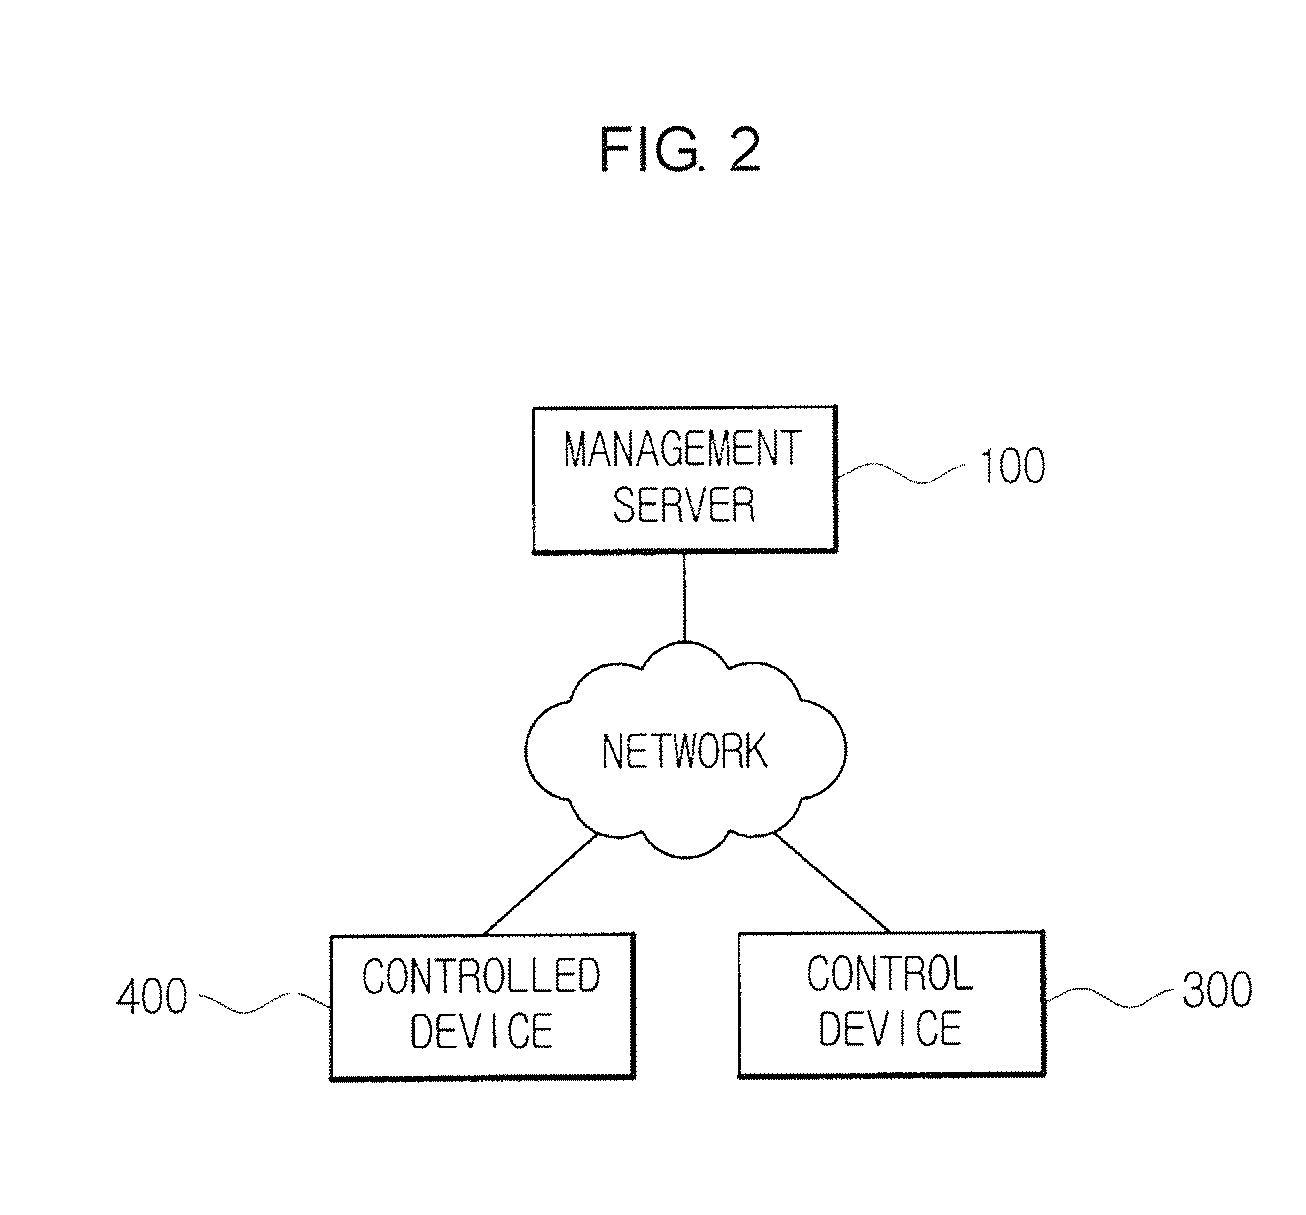 System for controlling devices and information on network by using hand gestures